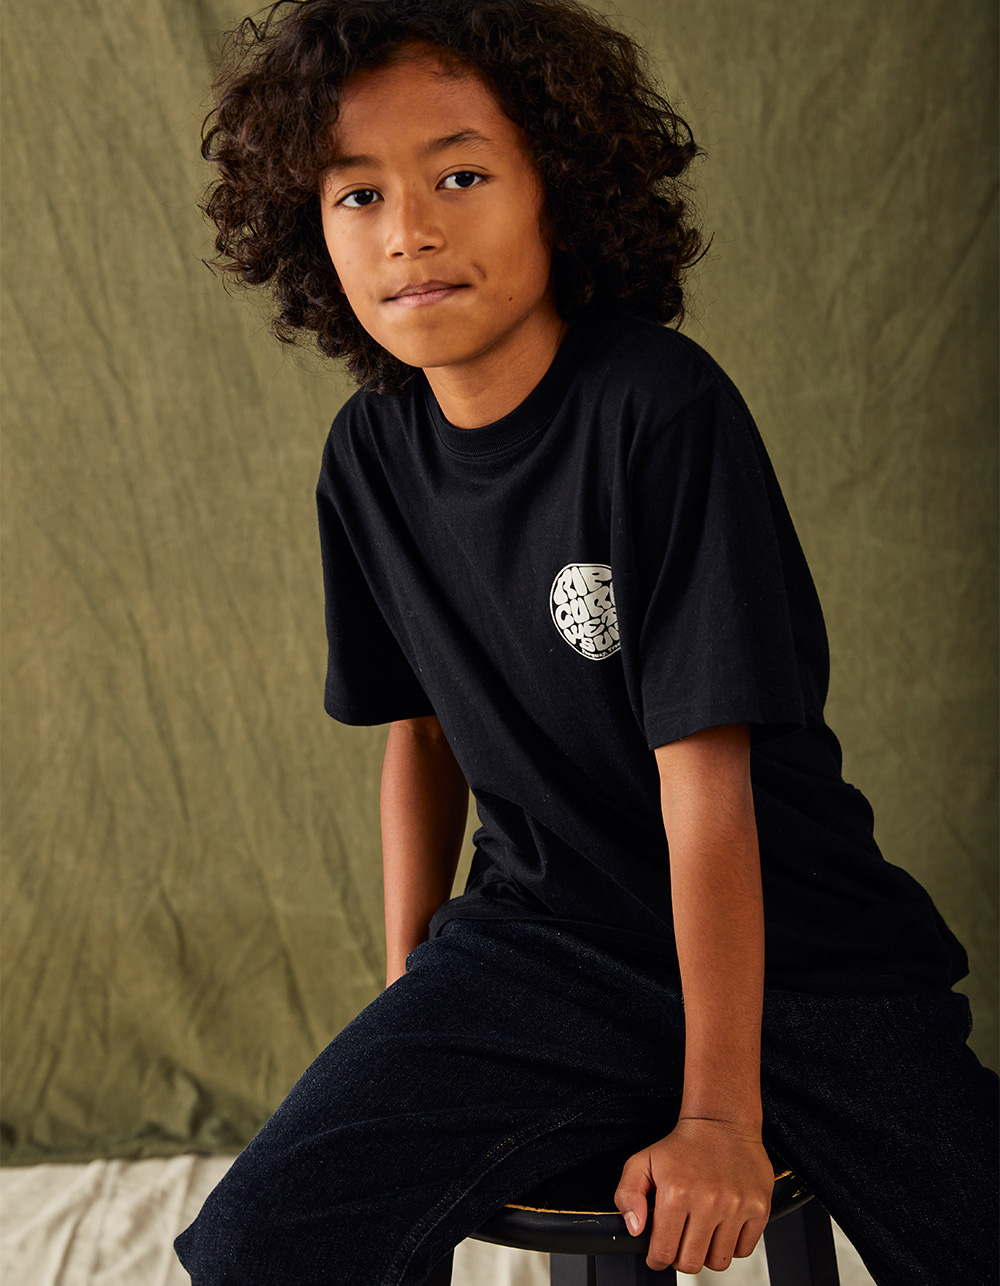 RIP CURL Wetsuit Icon Boys Tee